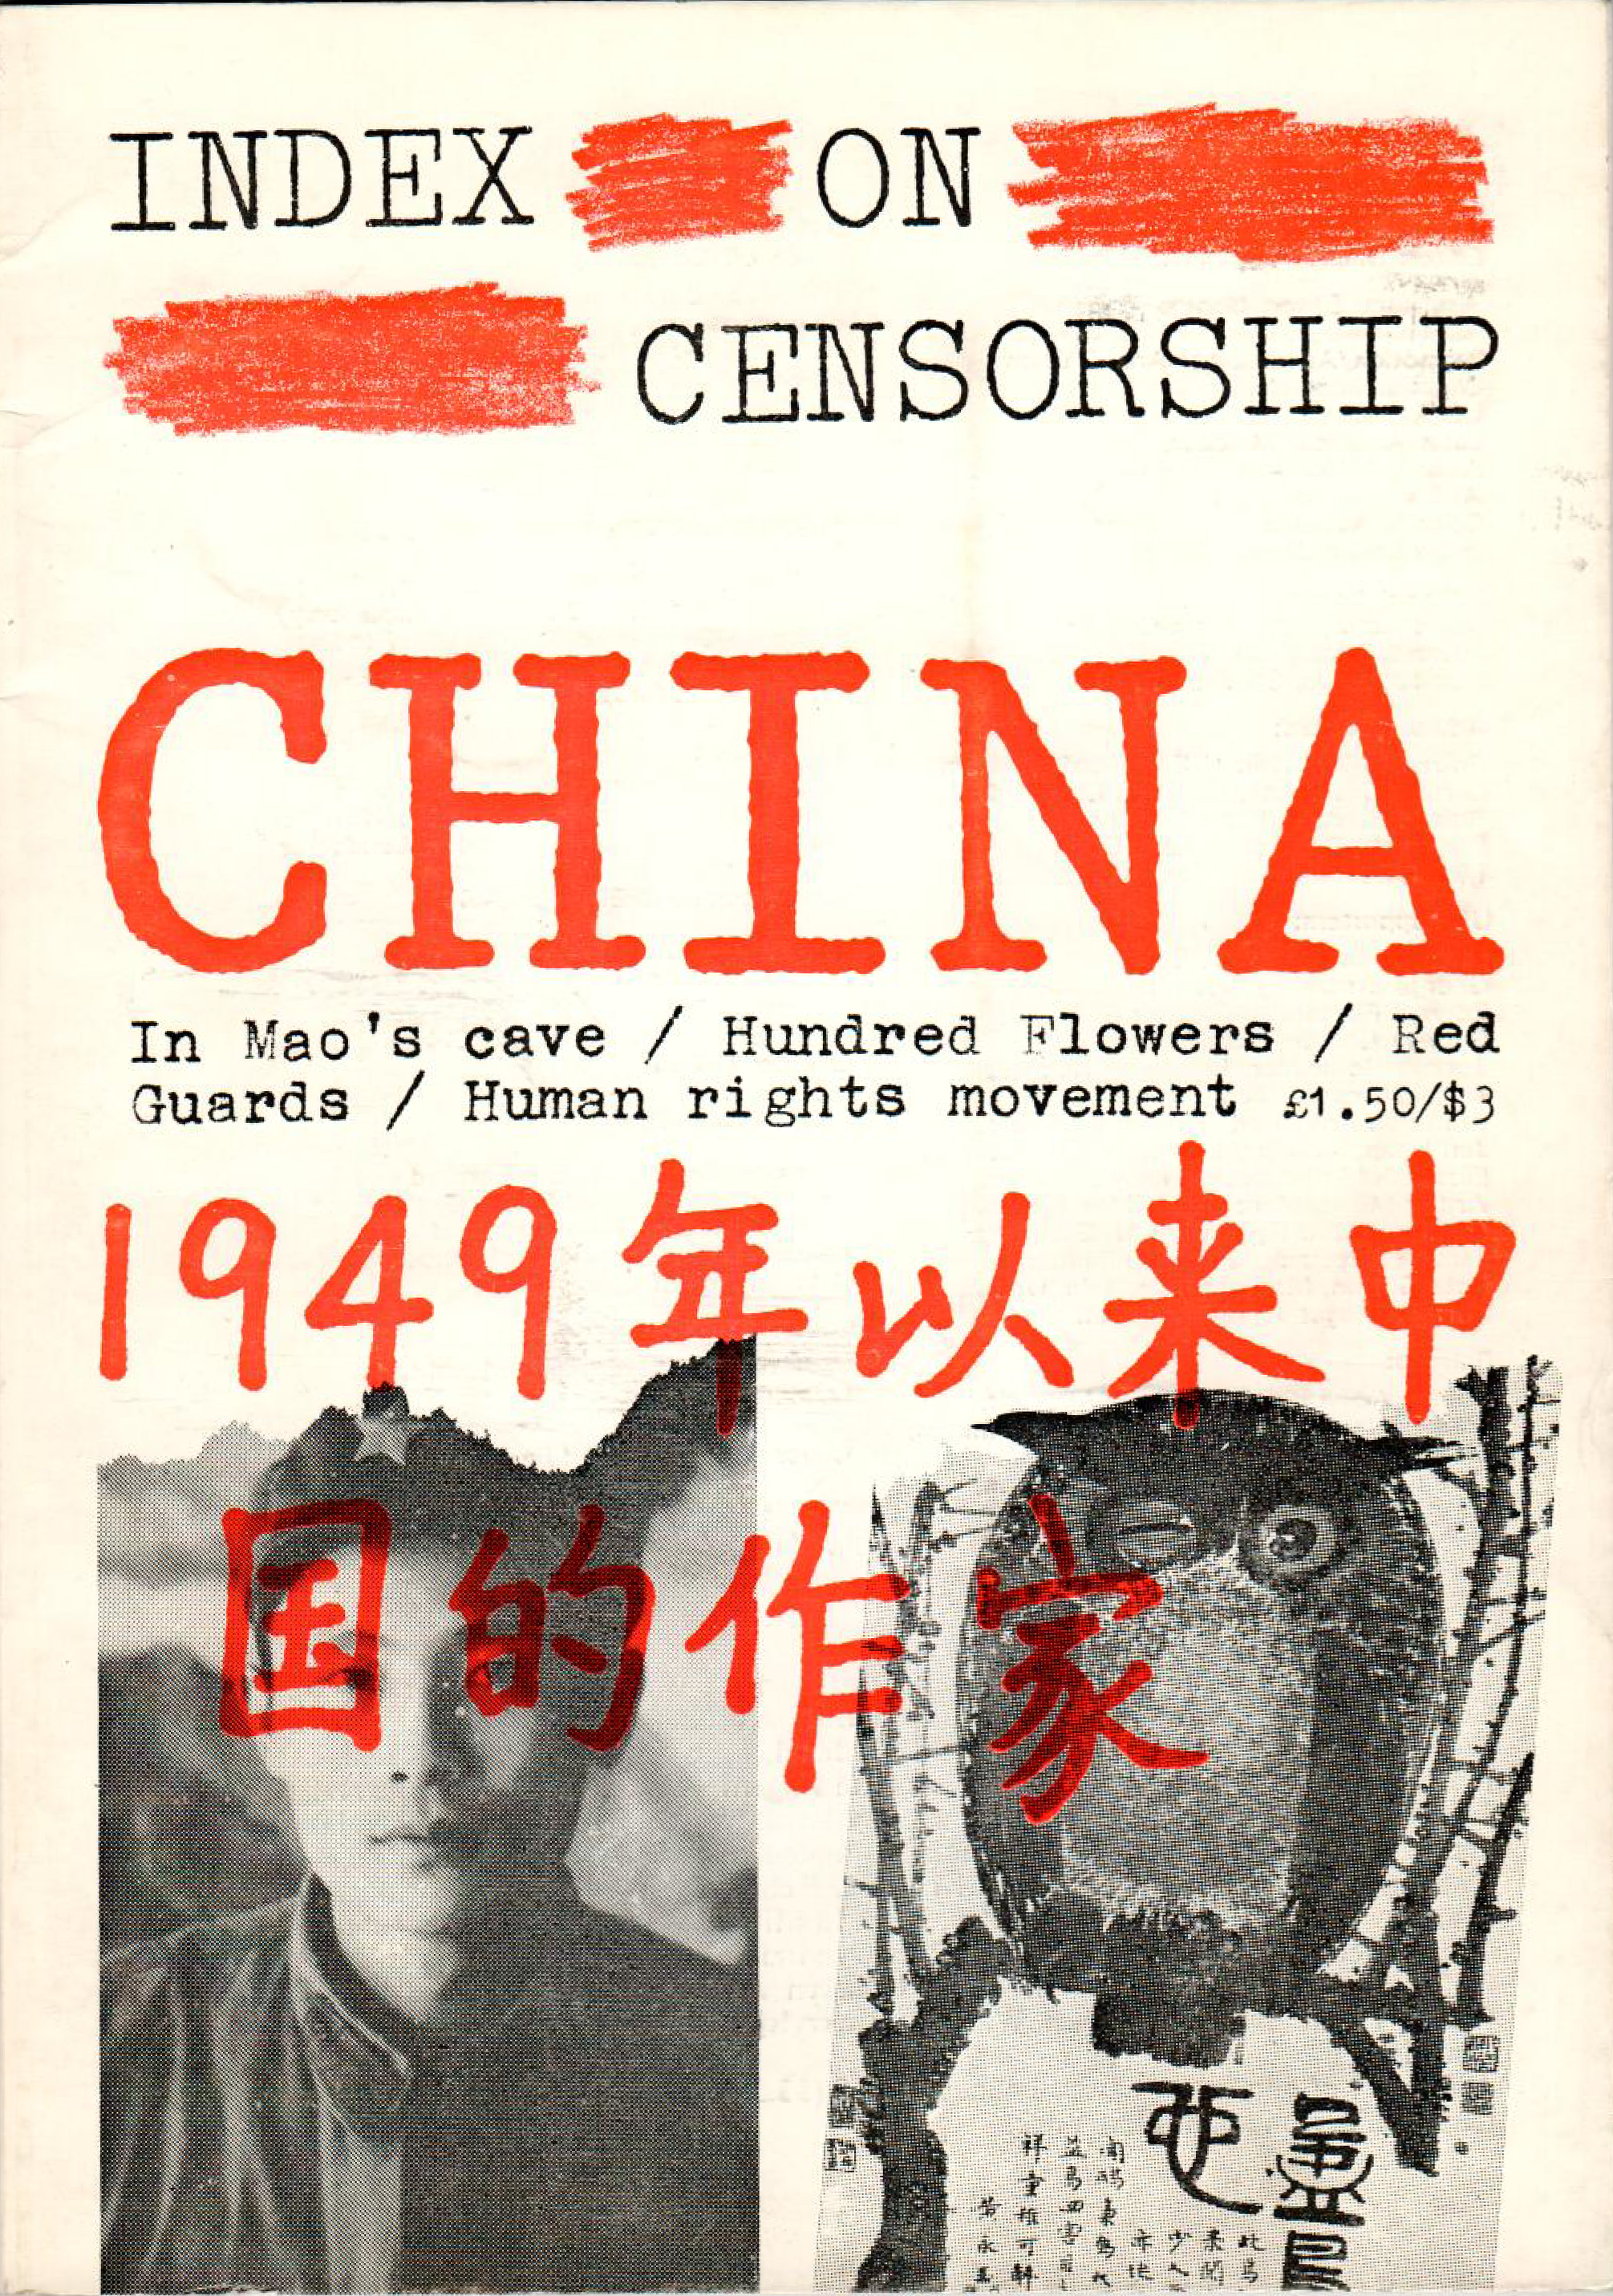 China: In Mao's cave, the February 1980 issue of Index on Censorship magazine